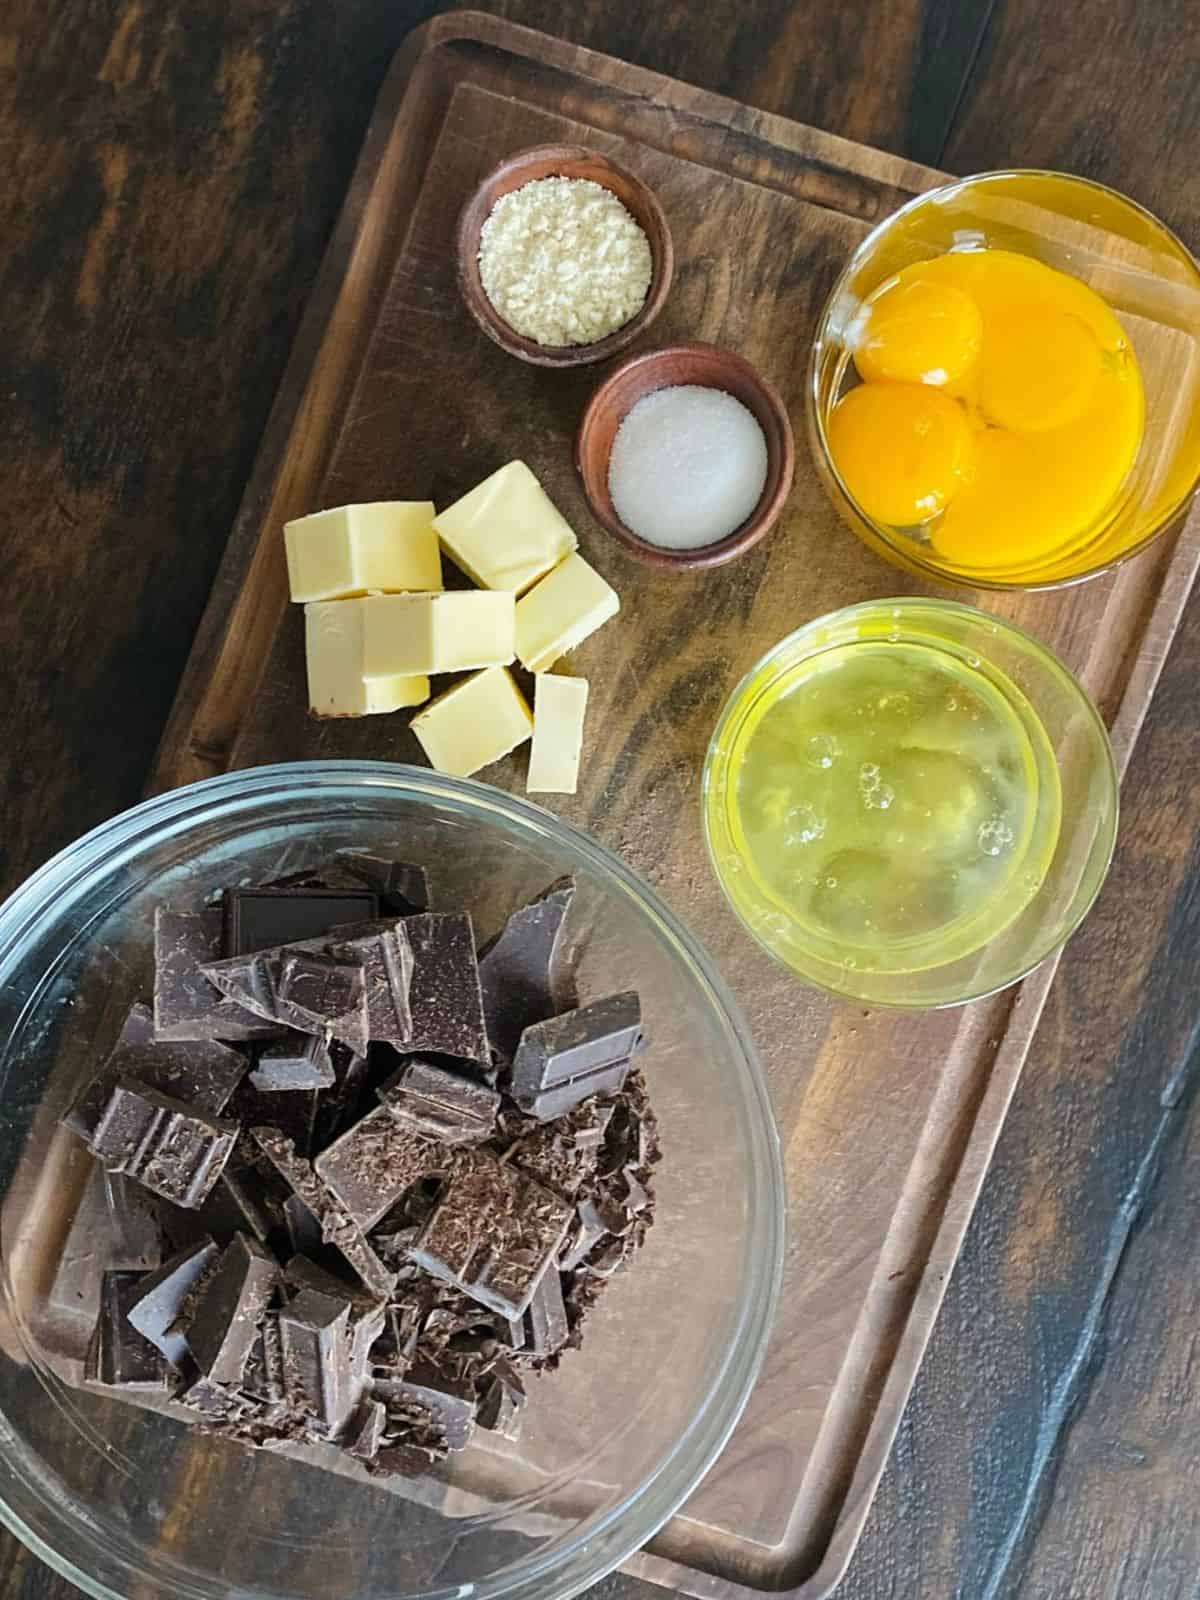 prepped ingredients for french chocolate cake on wood background